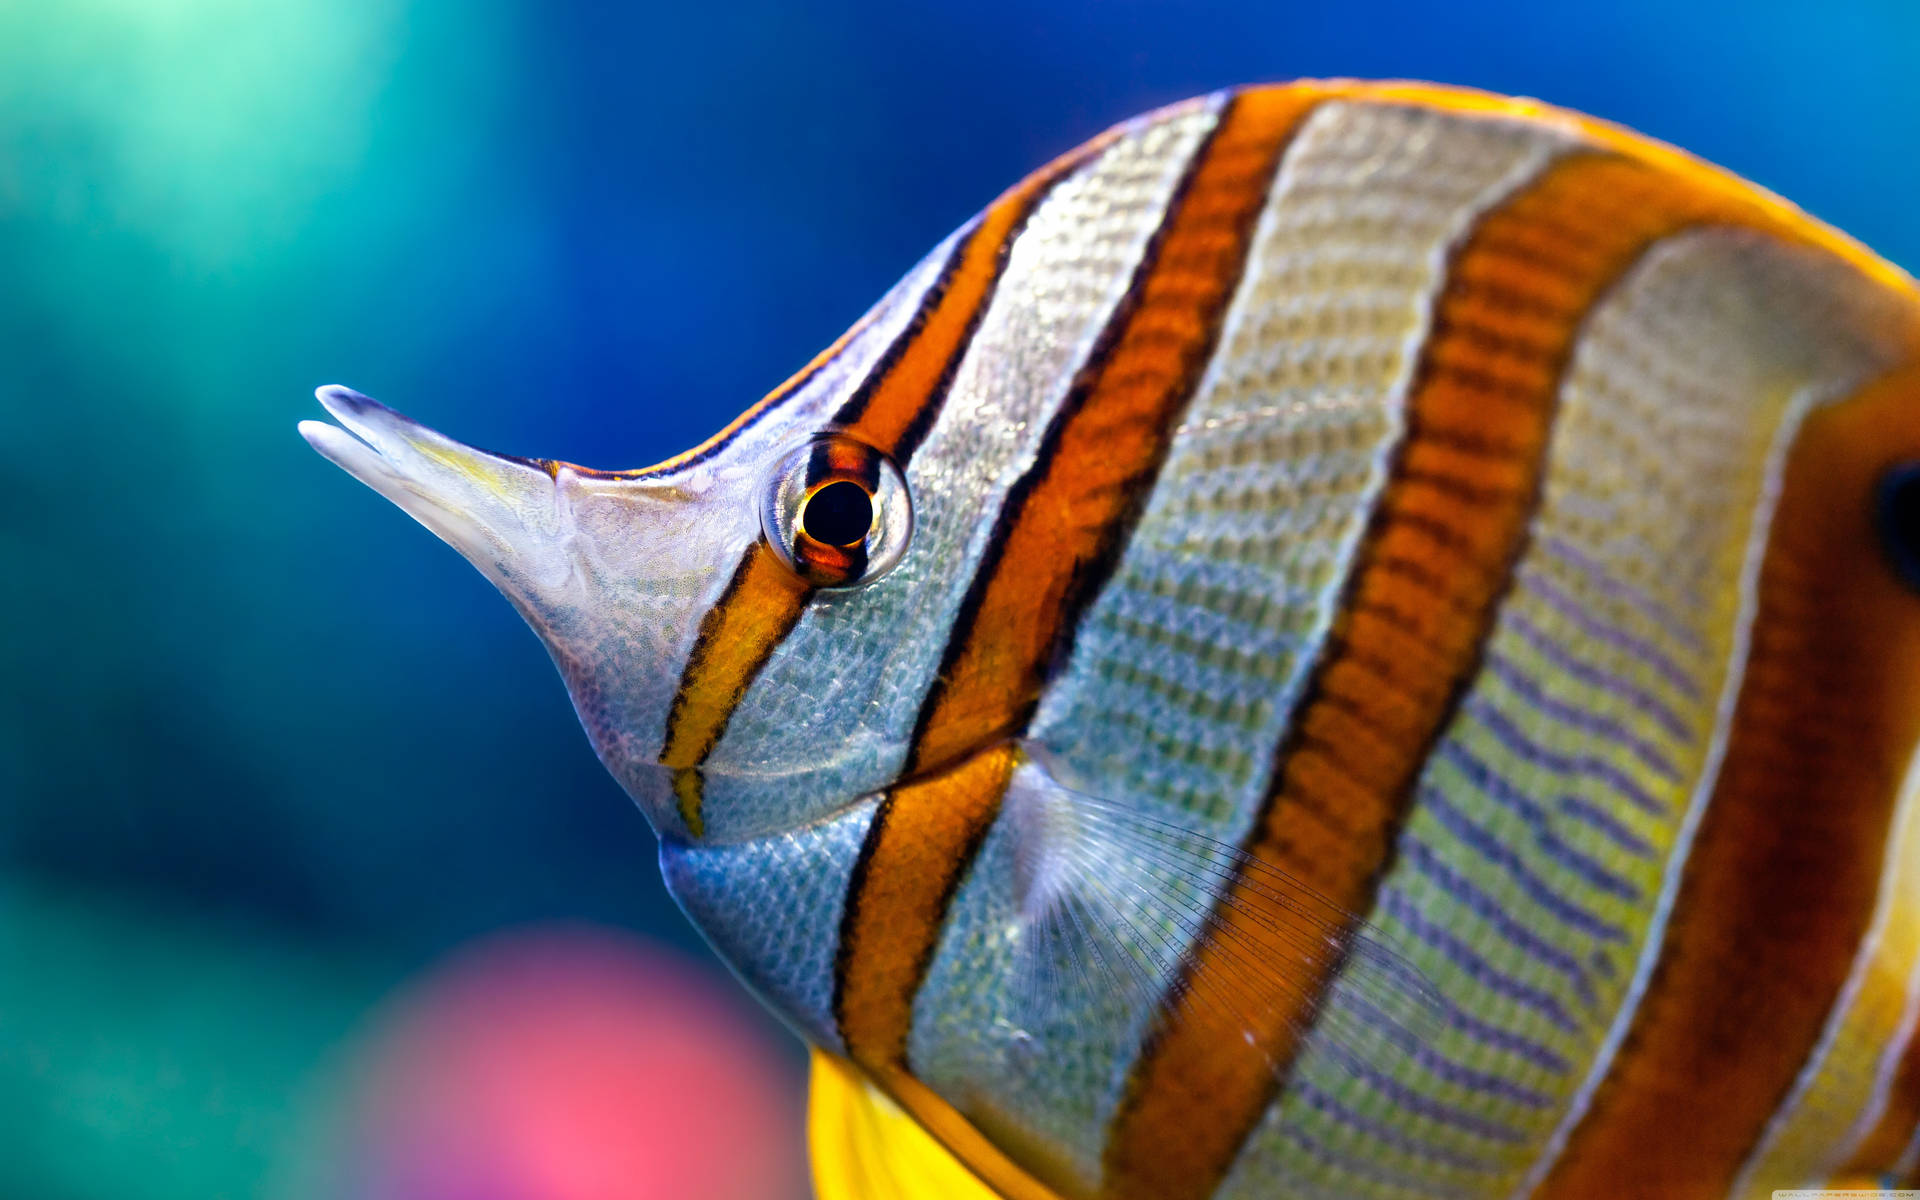 Extraordinary Close-Up of a Copperband Butterflyfish in 4K Ultra HD Wallpaper